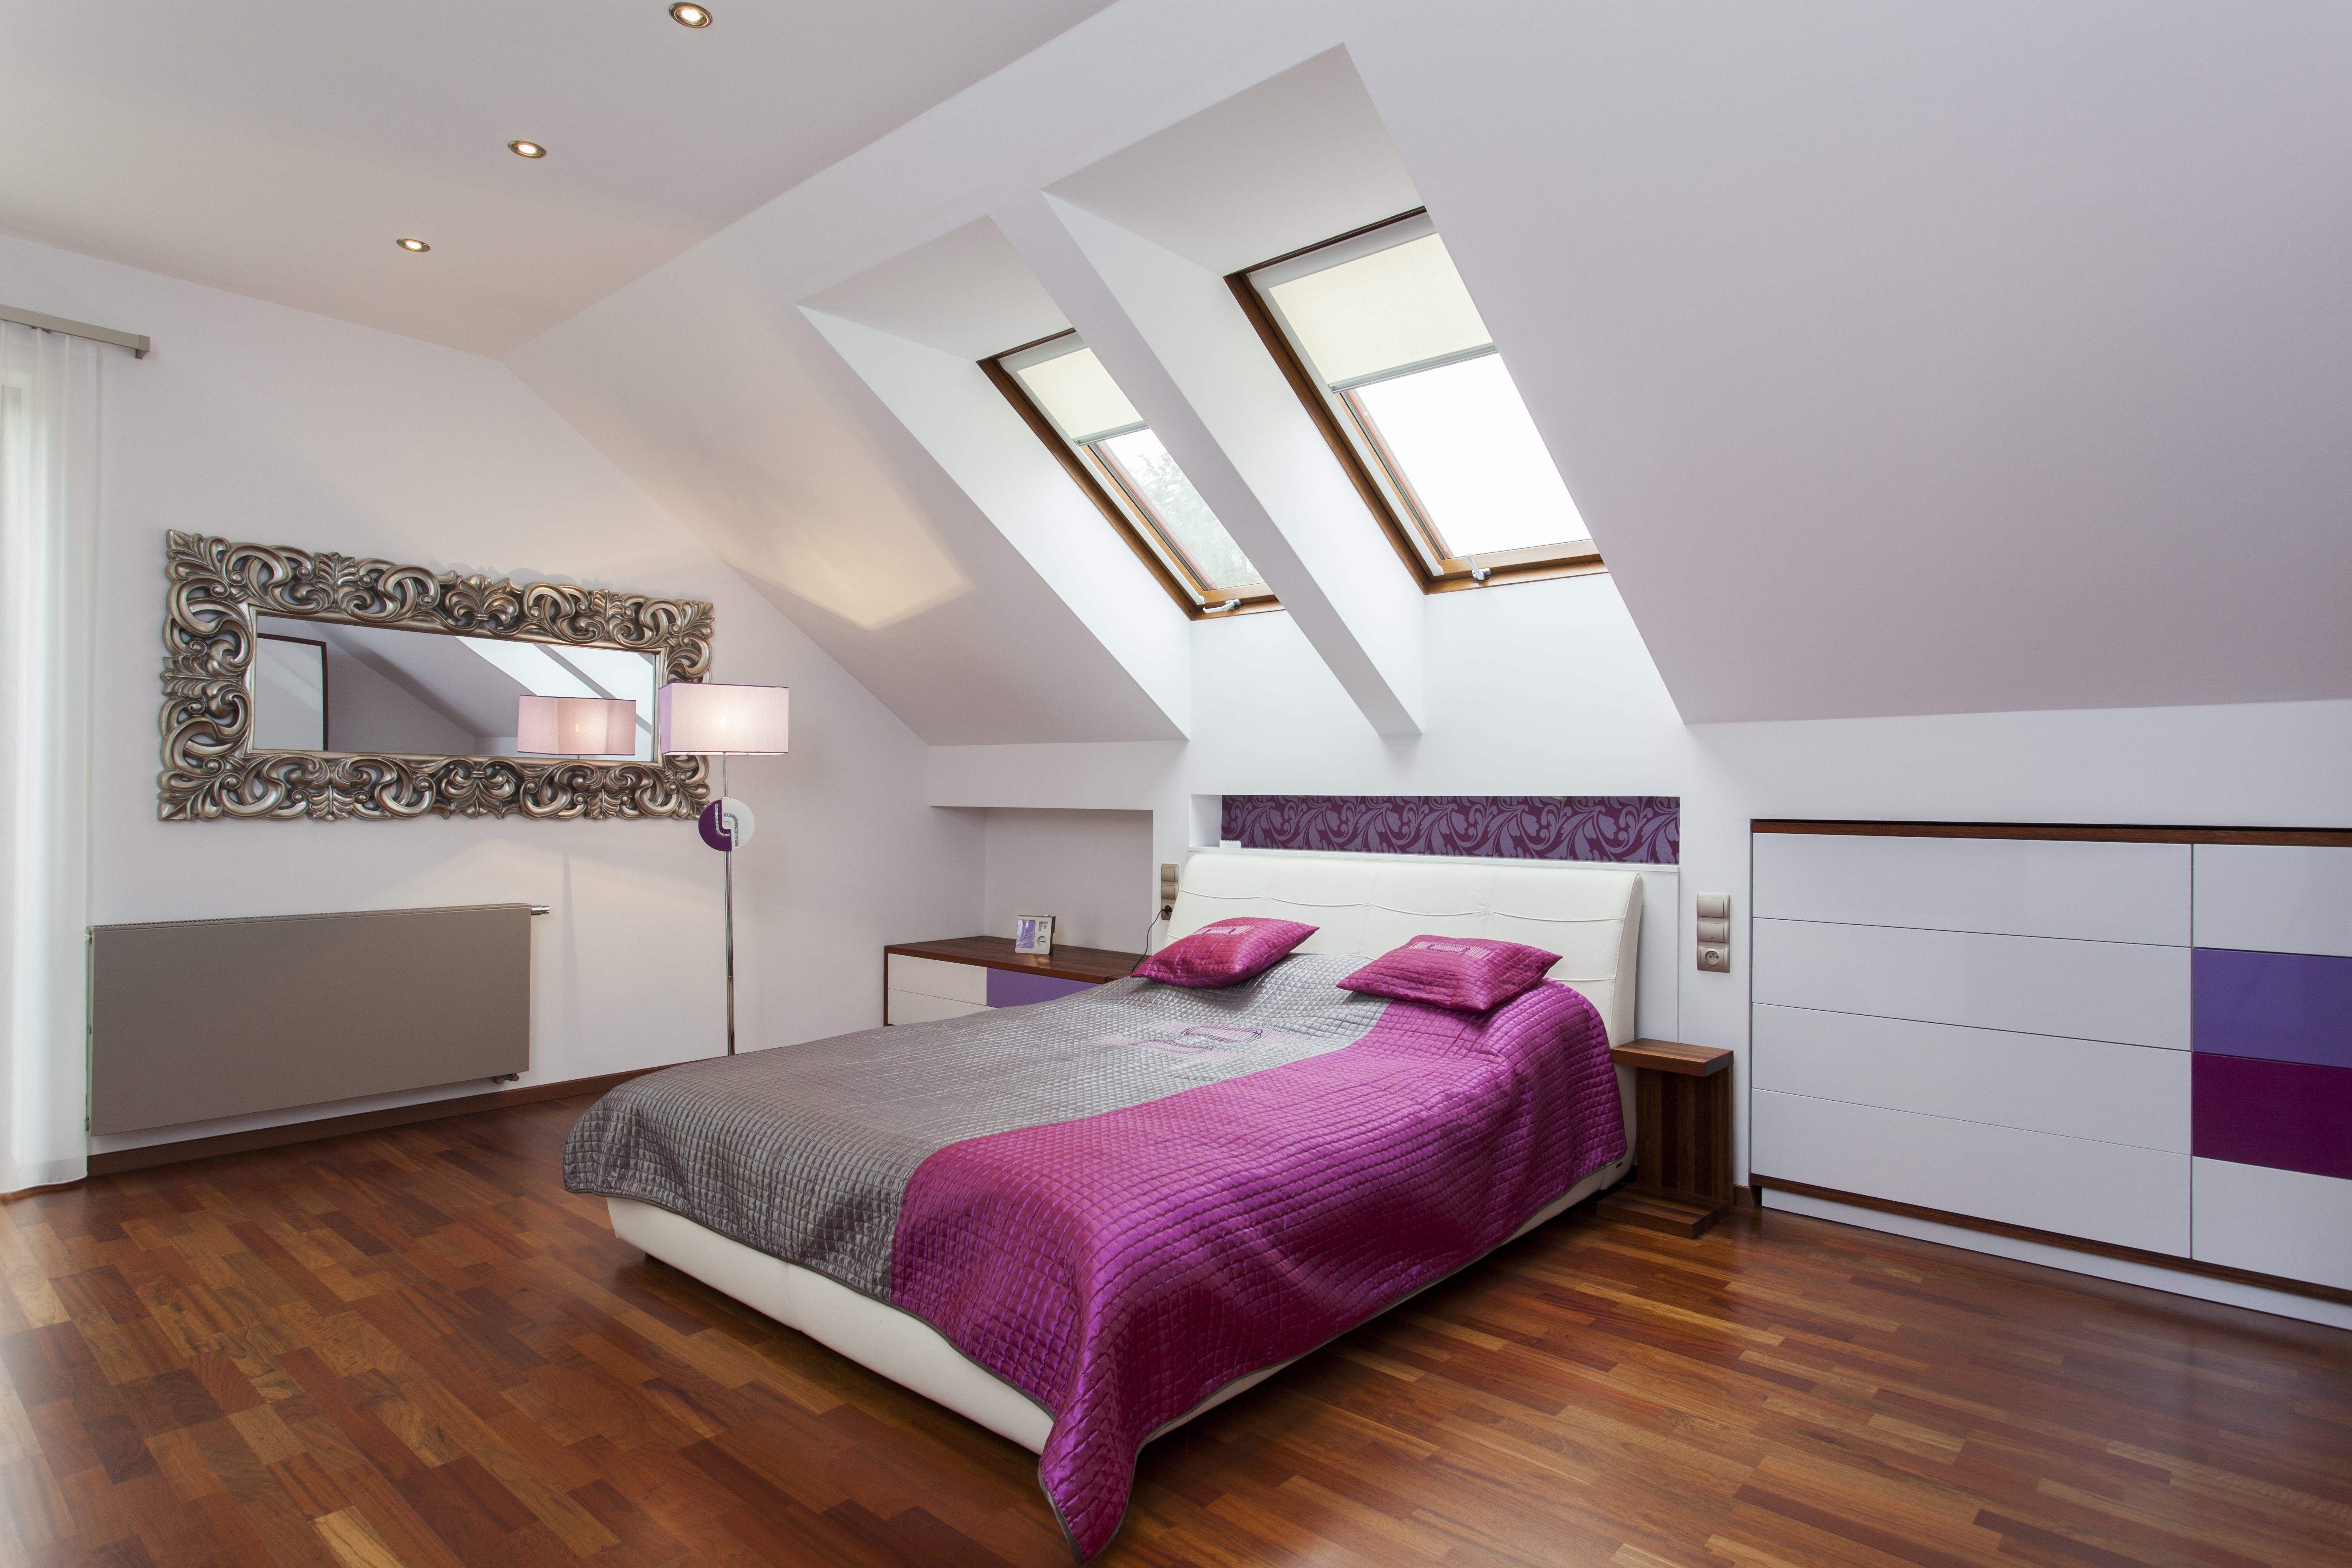 Modern bedroom in the attic of contemporary house